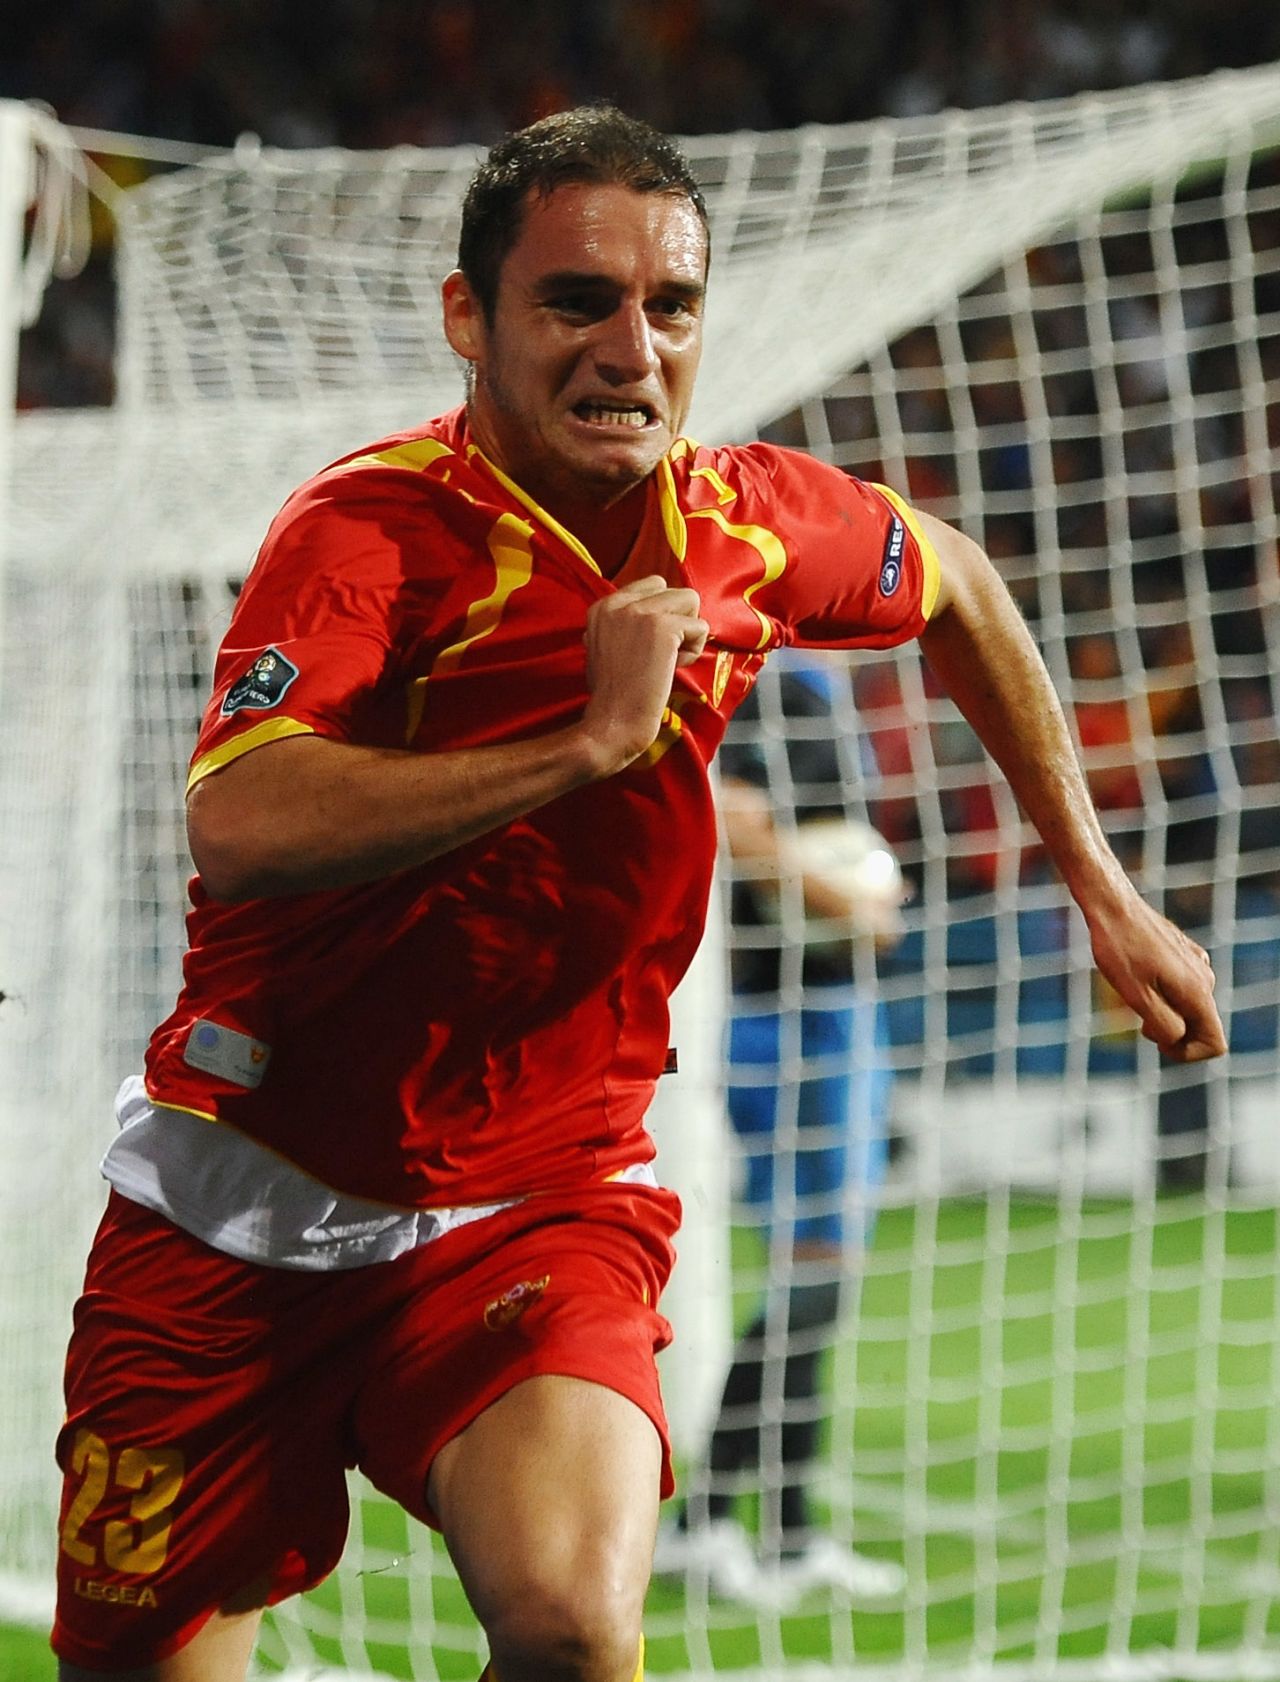 Montenegro's Andrija Delibasic scored a last-gasp equalizer to earn his side a 2-2 draw at home to England on Friday, securing their place in the playoffs. Should they qualify for Euro 2012, it would be the first time Montenegro have reached a major tournament.